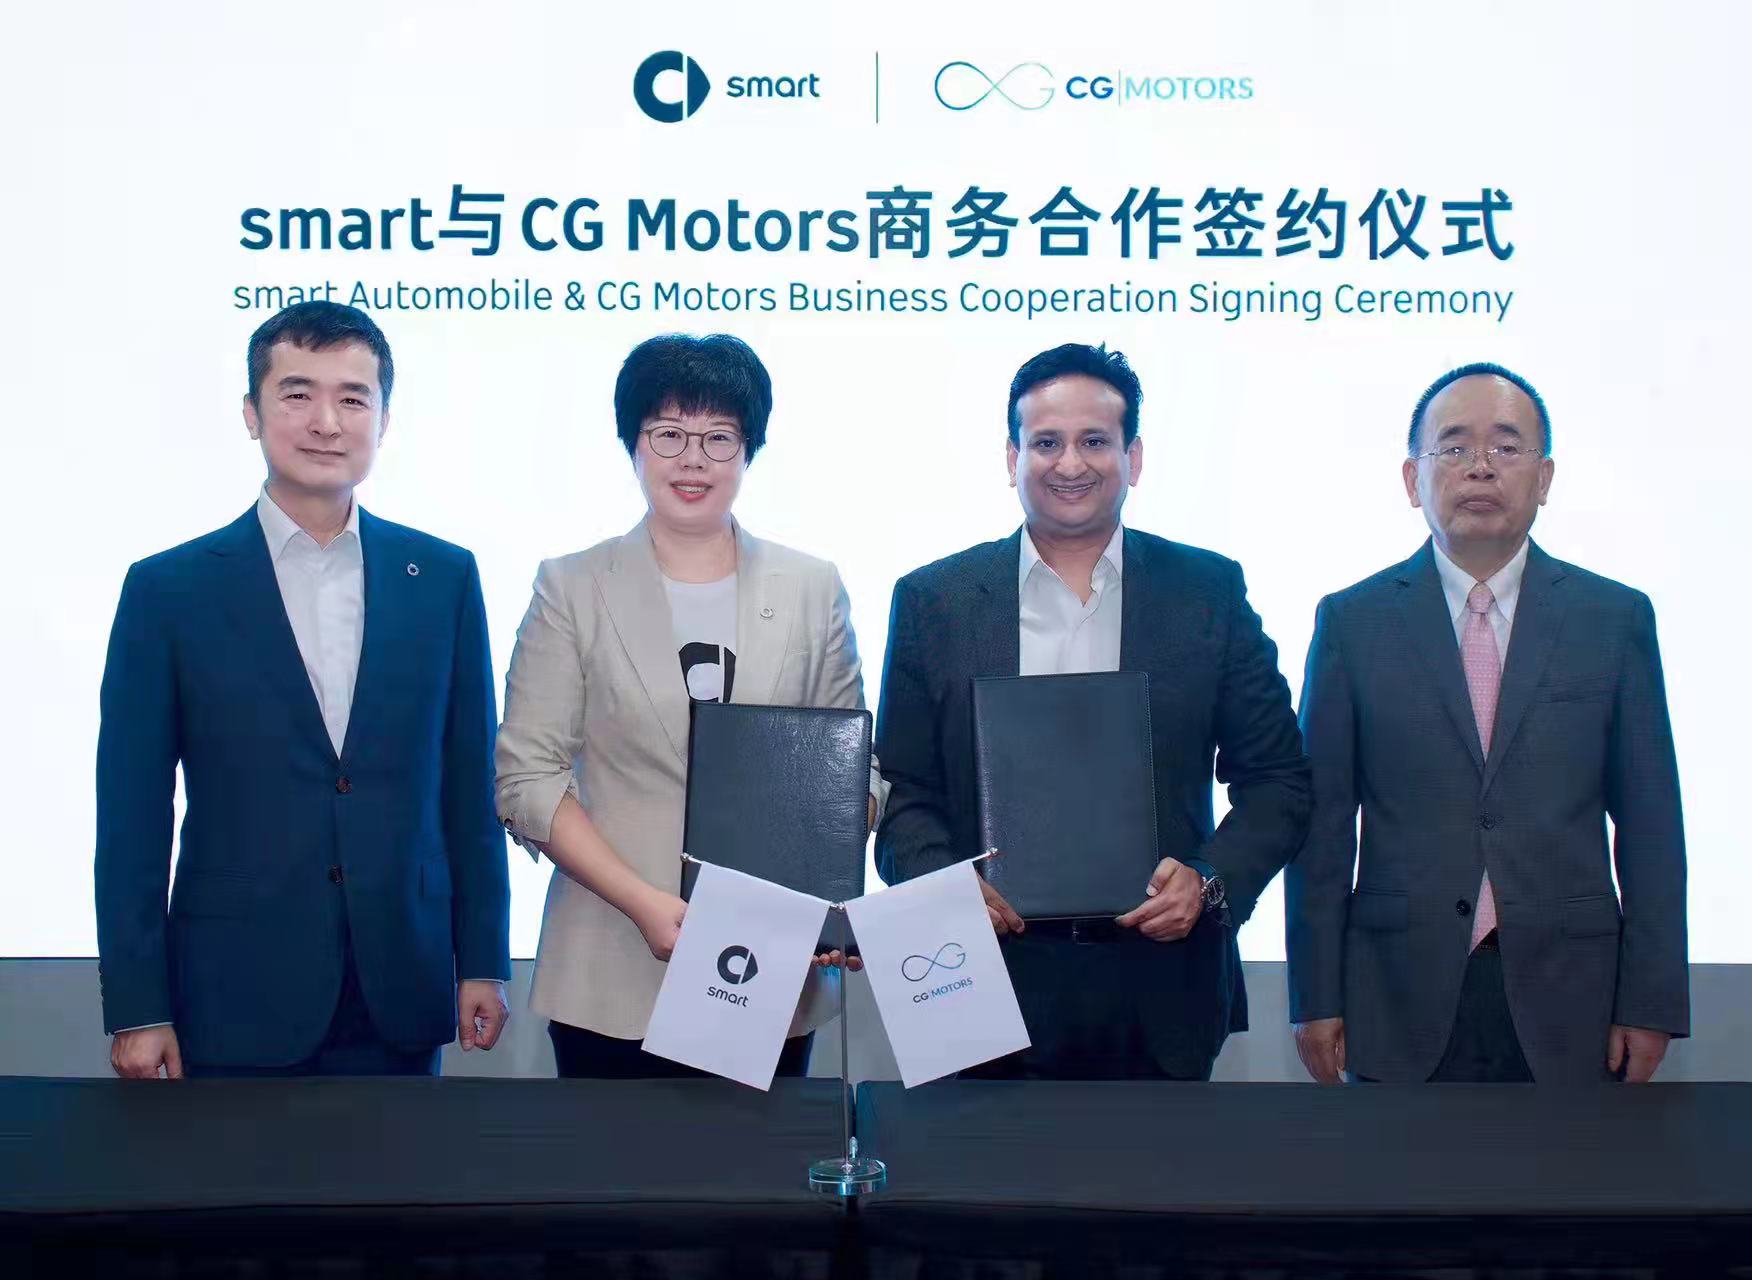 Smart and CG Motors sign Business Cooperation Agreement